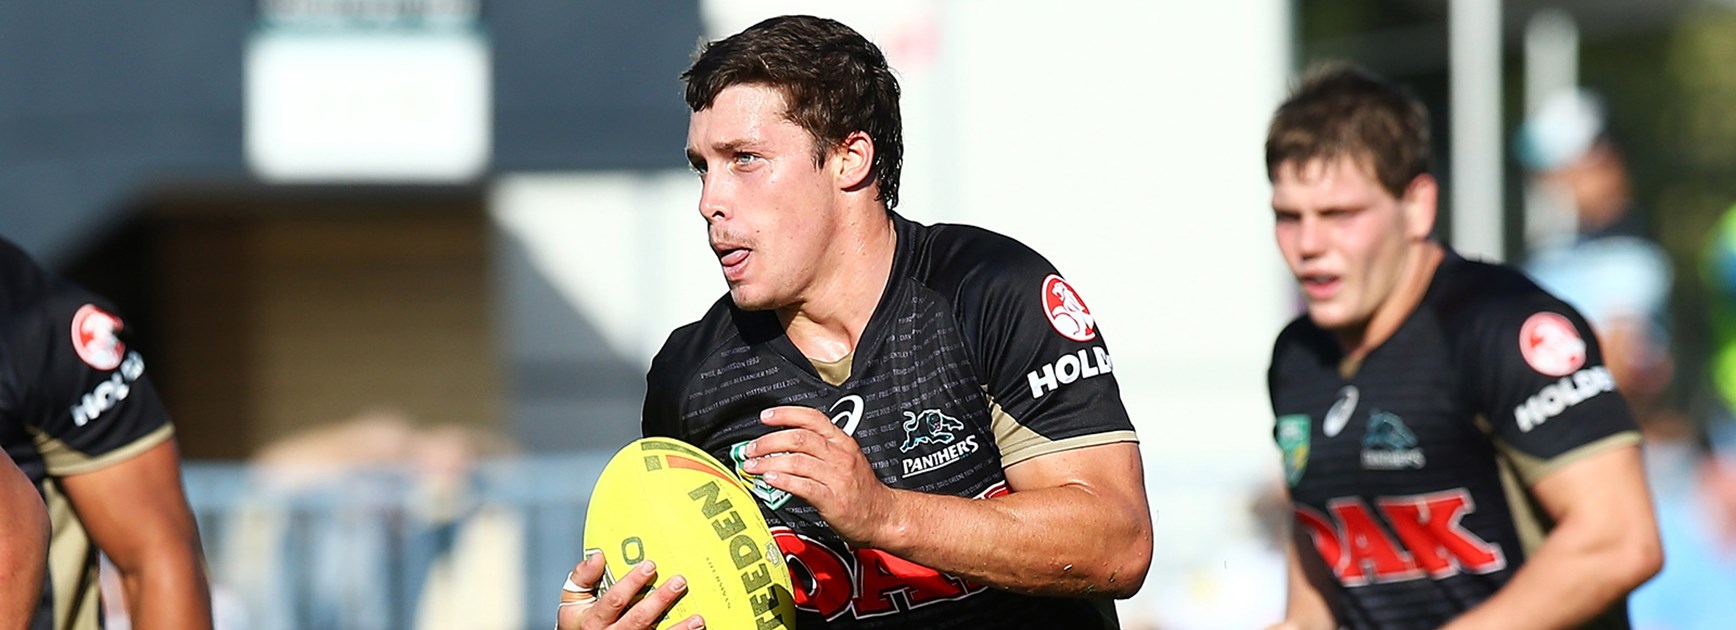 Panthers NYC fullback Dylan Edwards scored two late tries against the Sharks in Round 8.